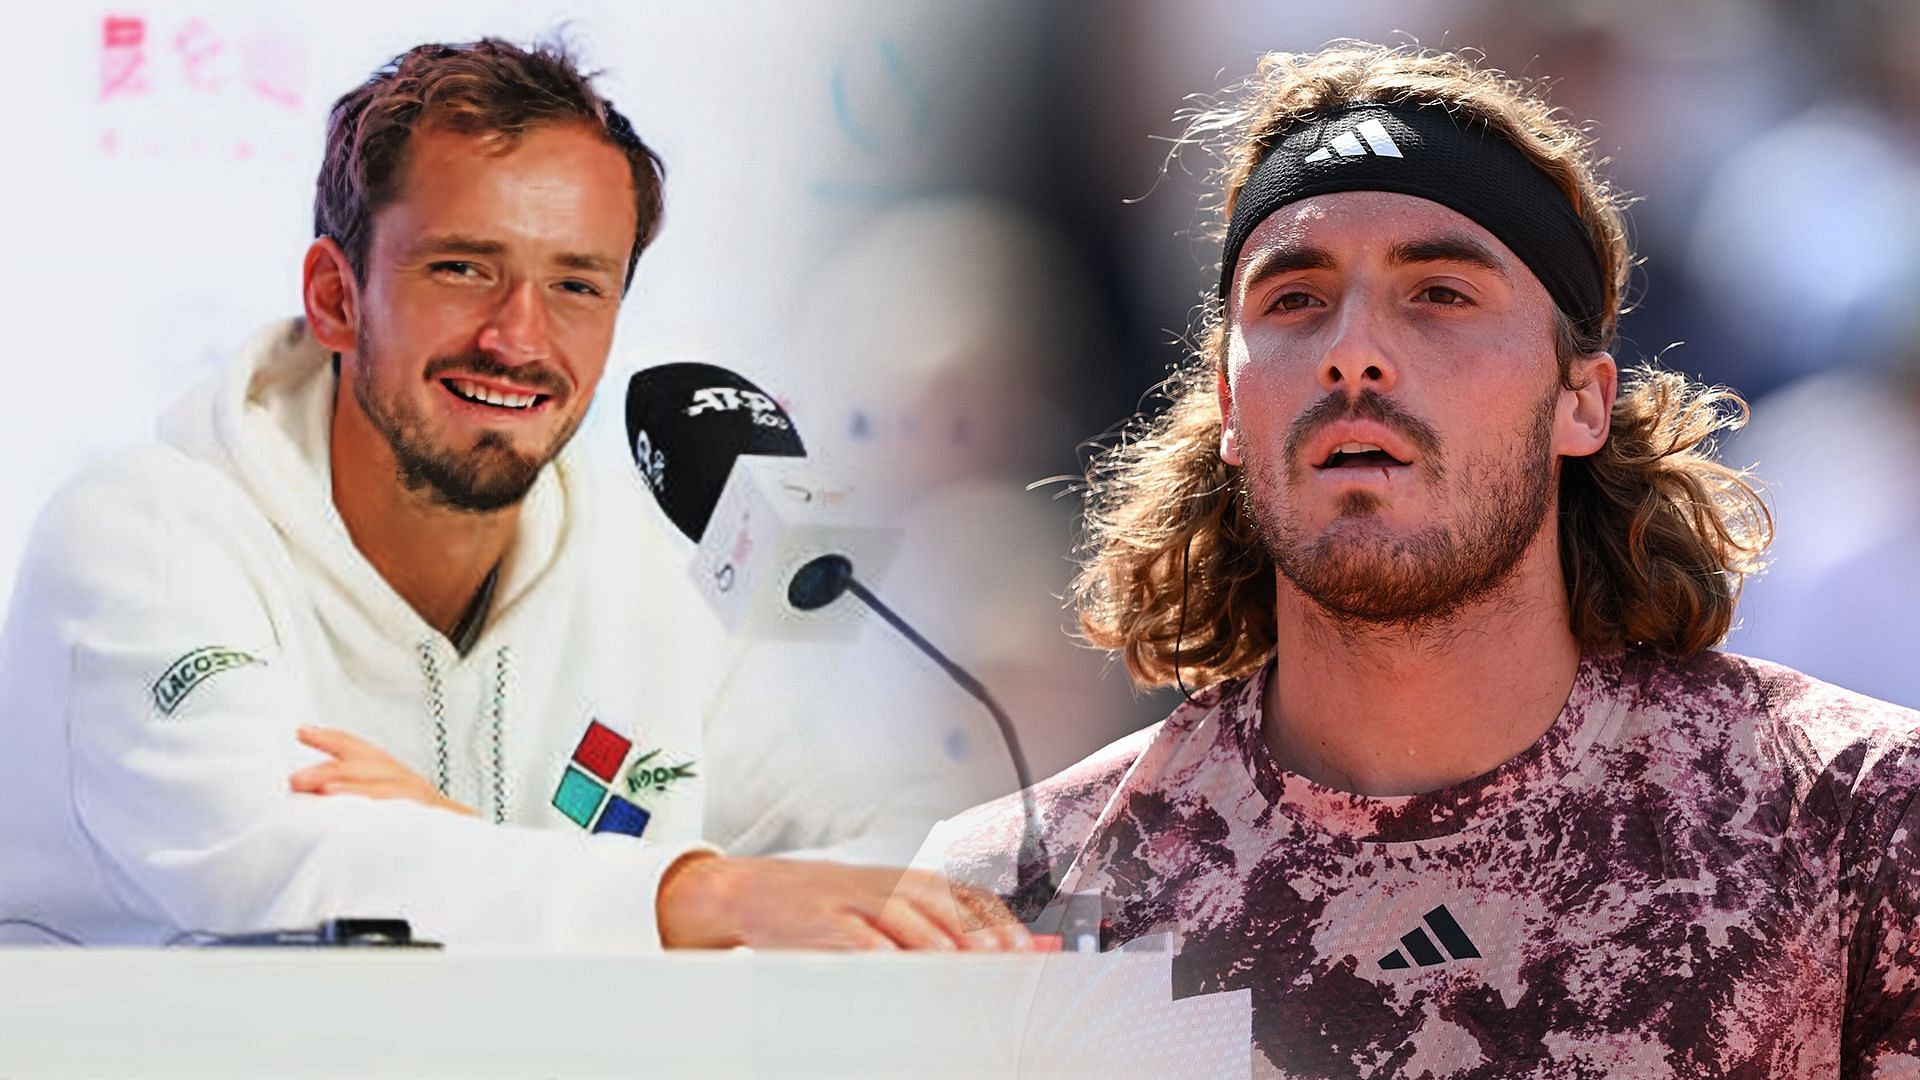 Daniil Medvedev has said that he and Stefanos Tsitsipas have a respectful relationship these days